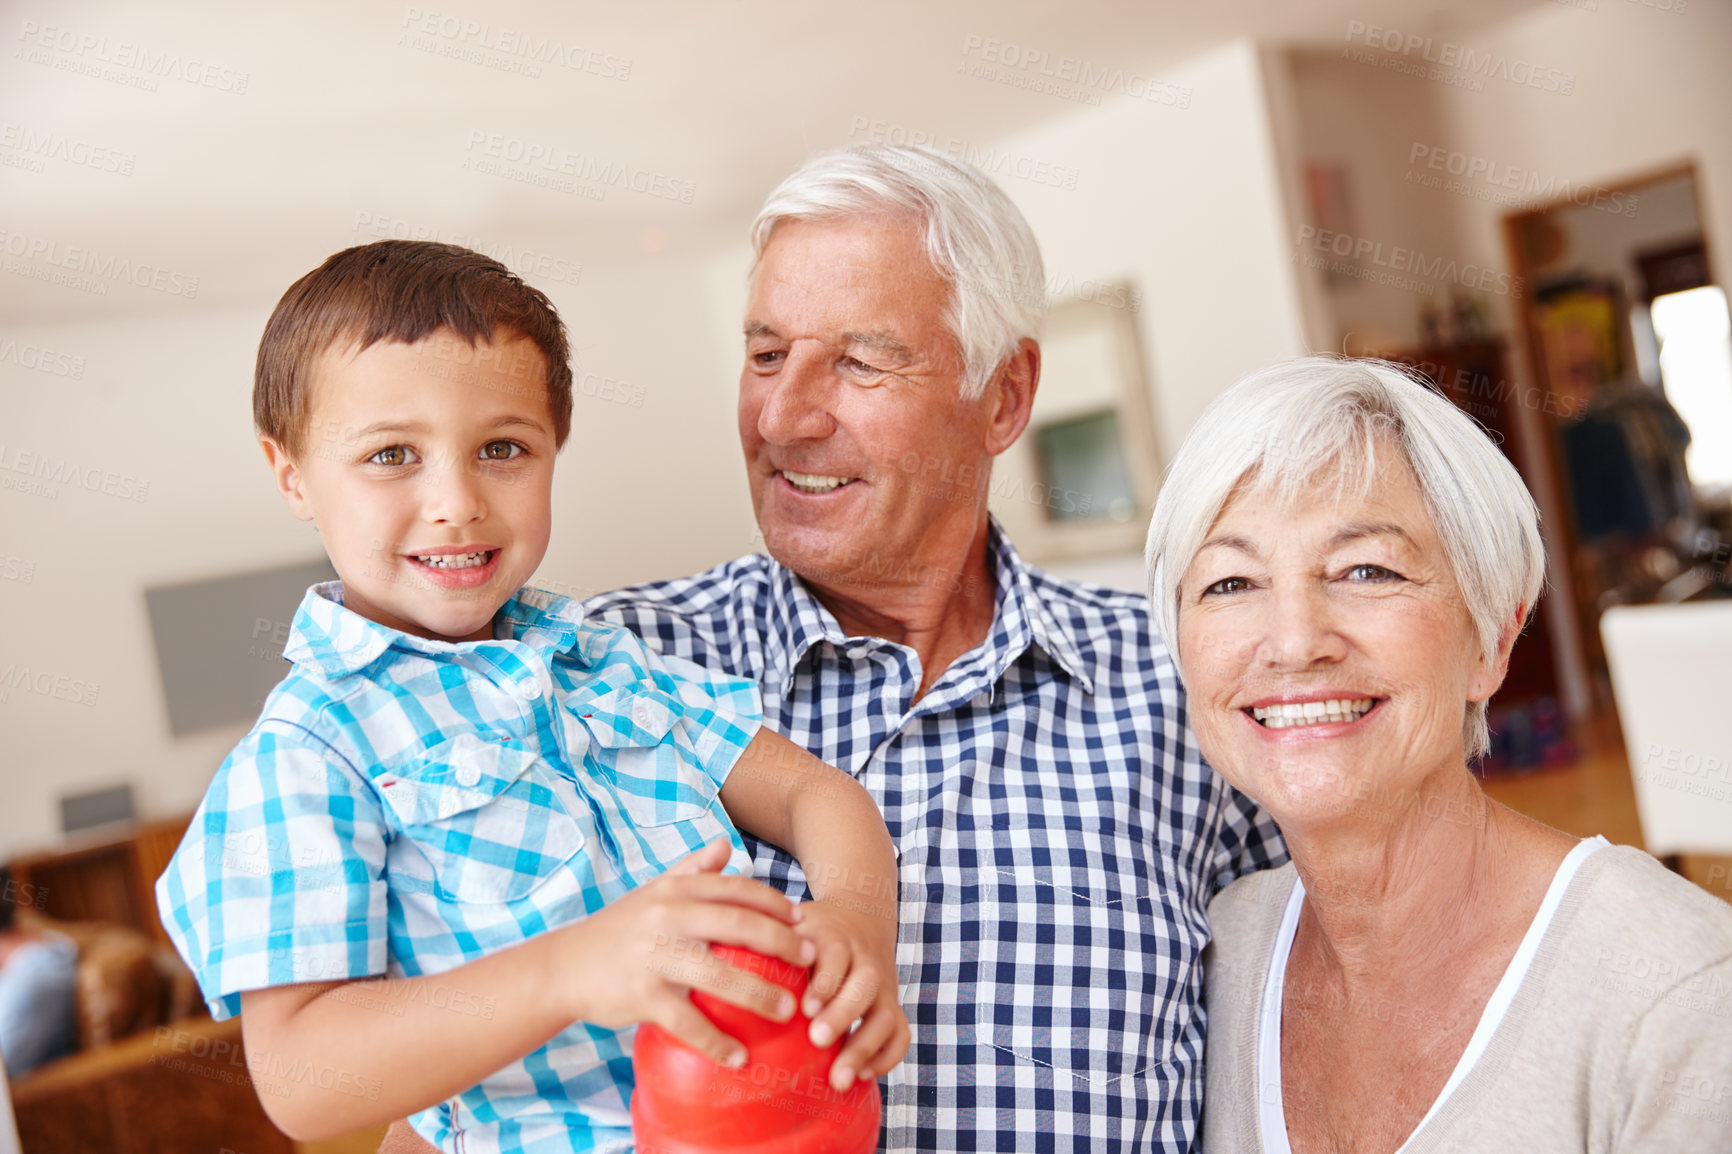 Buy stock photo Cropped shot of a little boy with his grandparents